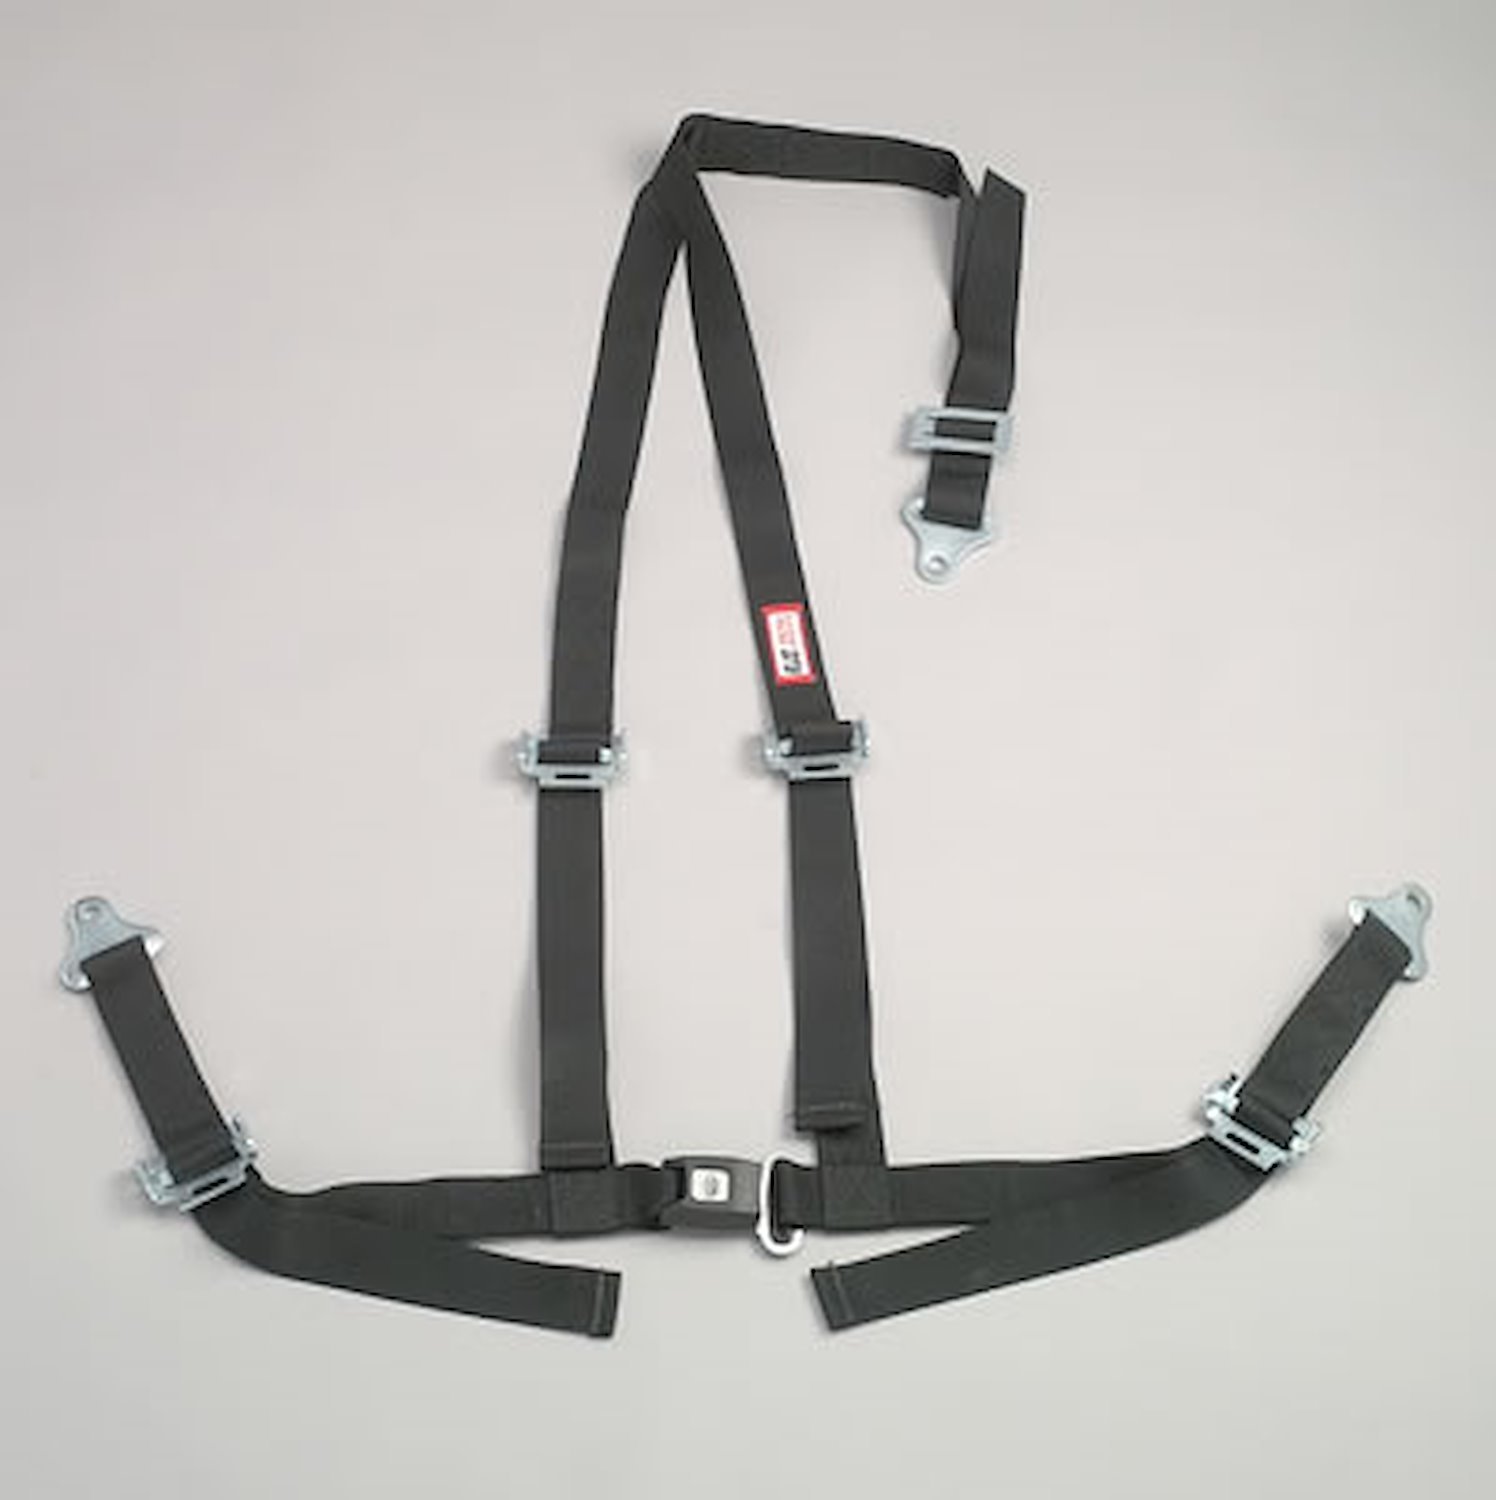 NON-SFI B&T HARNESS 2 PULL DOWN Lap Belt SNAP 2 S.H. INDIVIDUAL FLOOR Mount WRAP/BOLT YELLOW